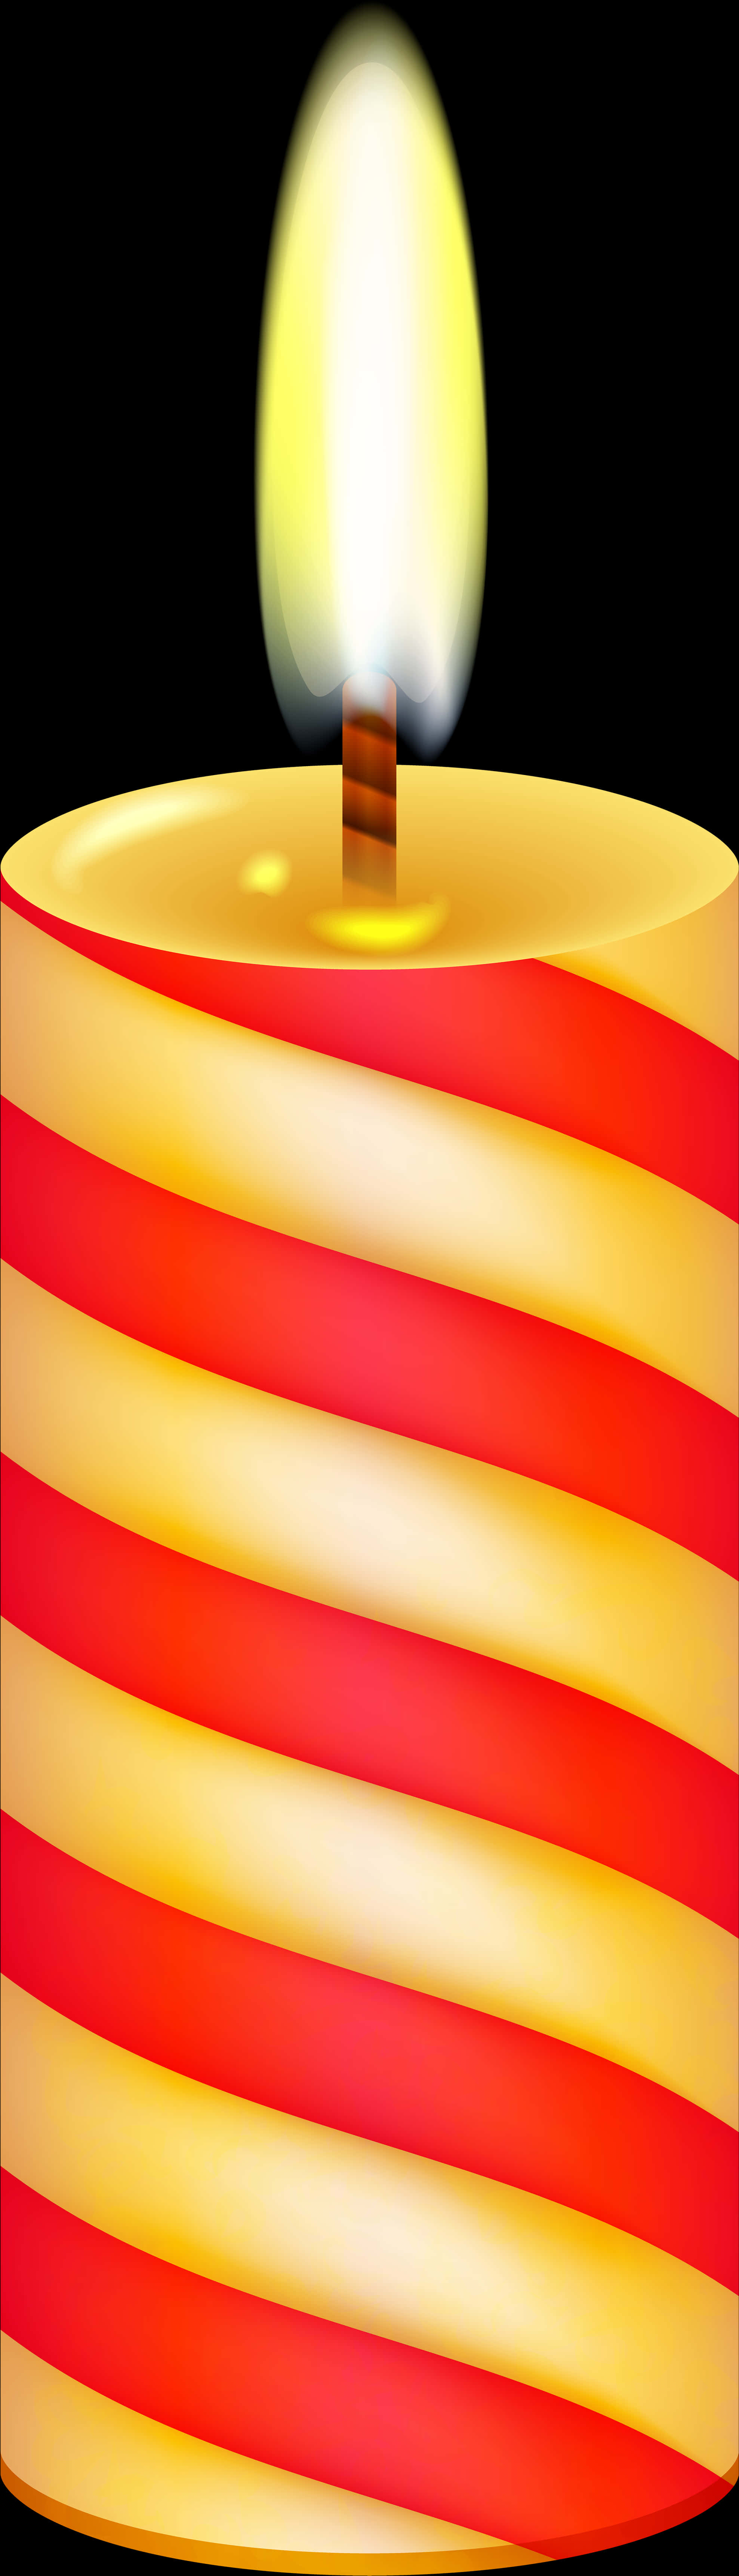 Striped Candle Lit Flame PNG